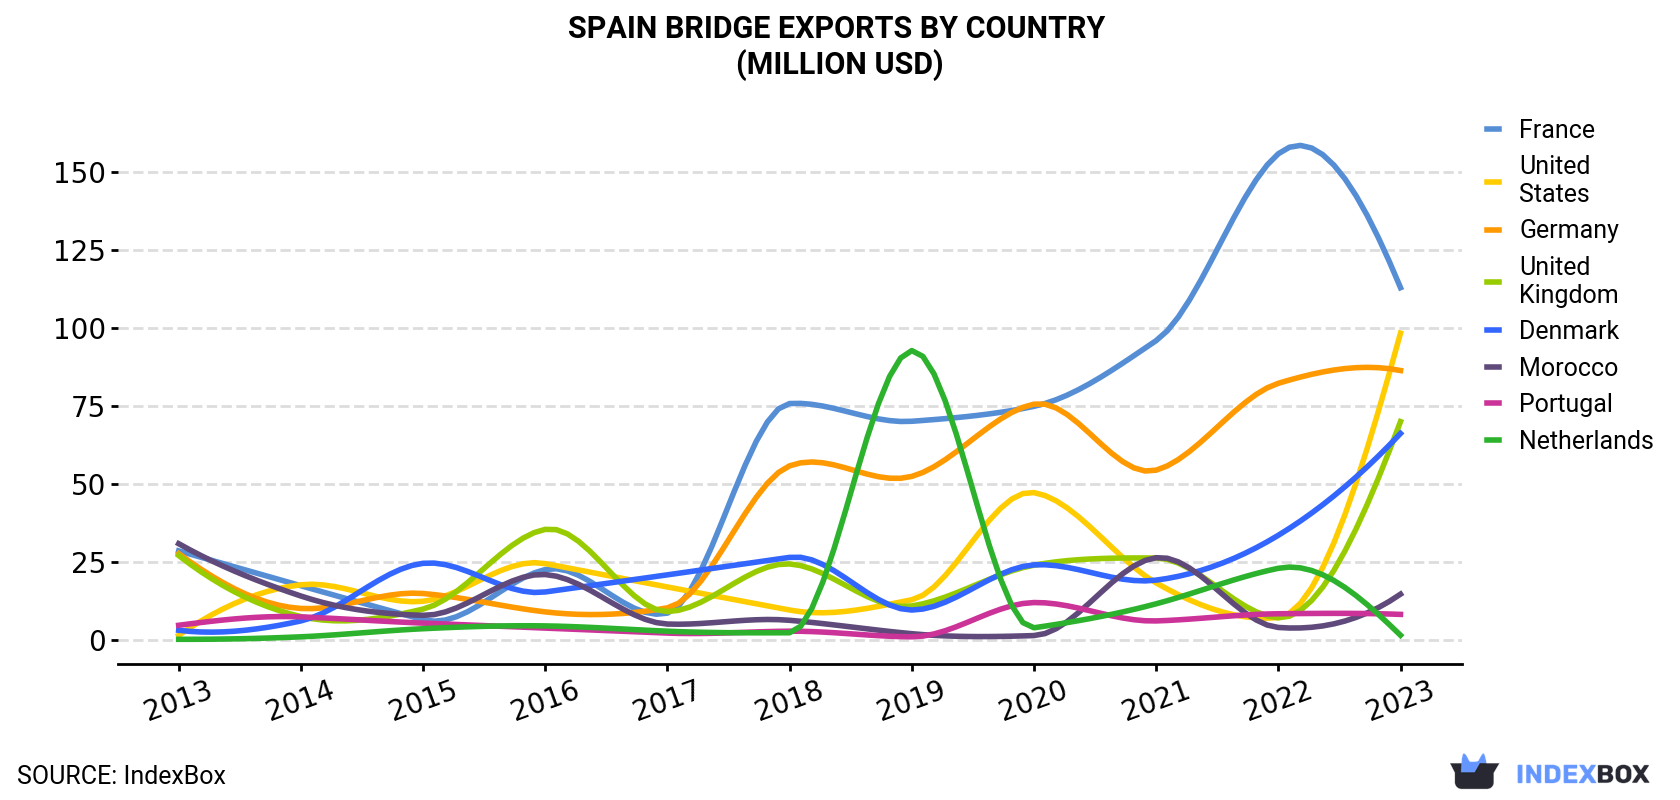 Spain Bridge Exports By Country (Million USD)